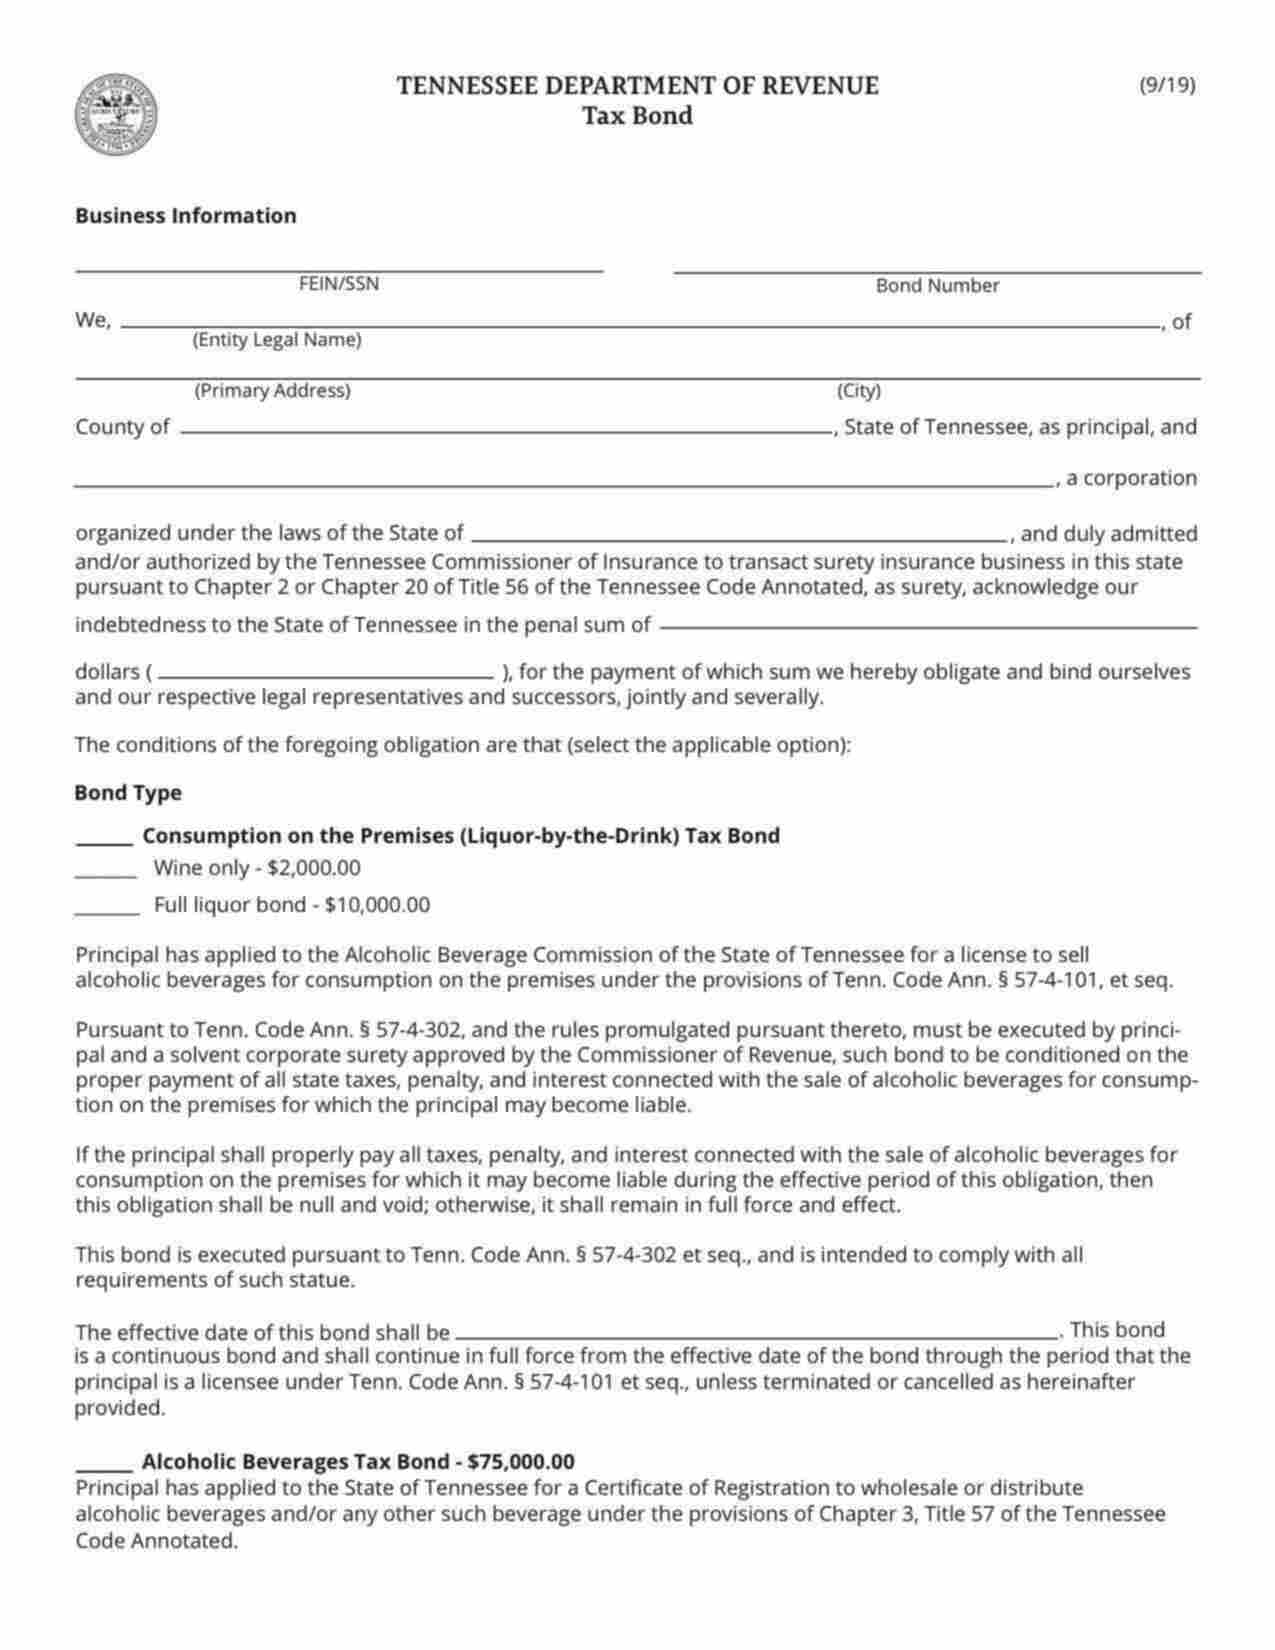 Tennessee Out of State Contractor Business Tax Bond Form